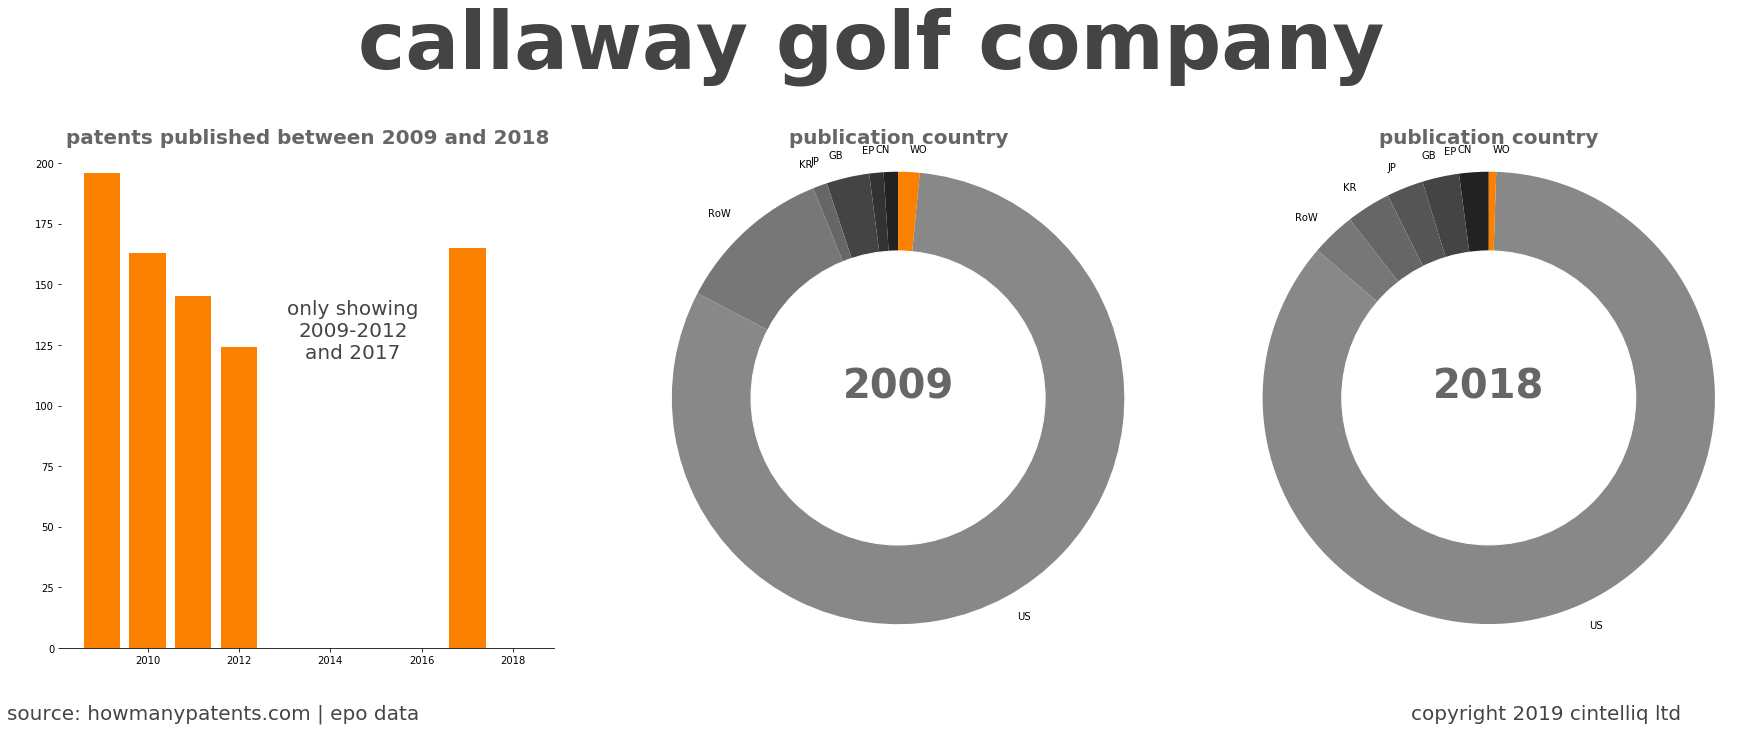 summary of patents for Callaway Golf Company